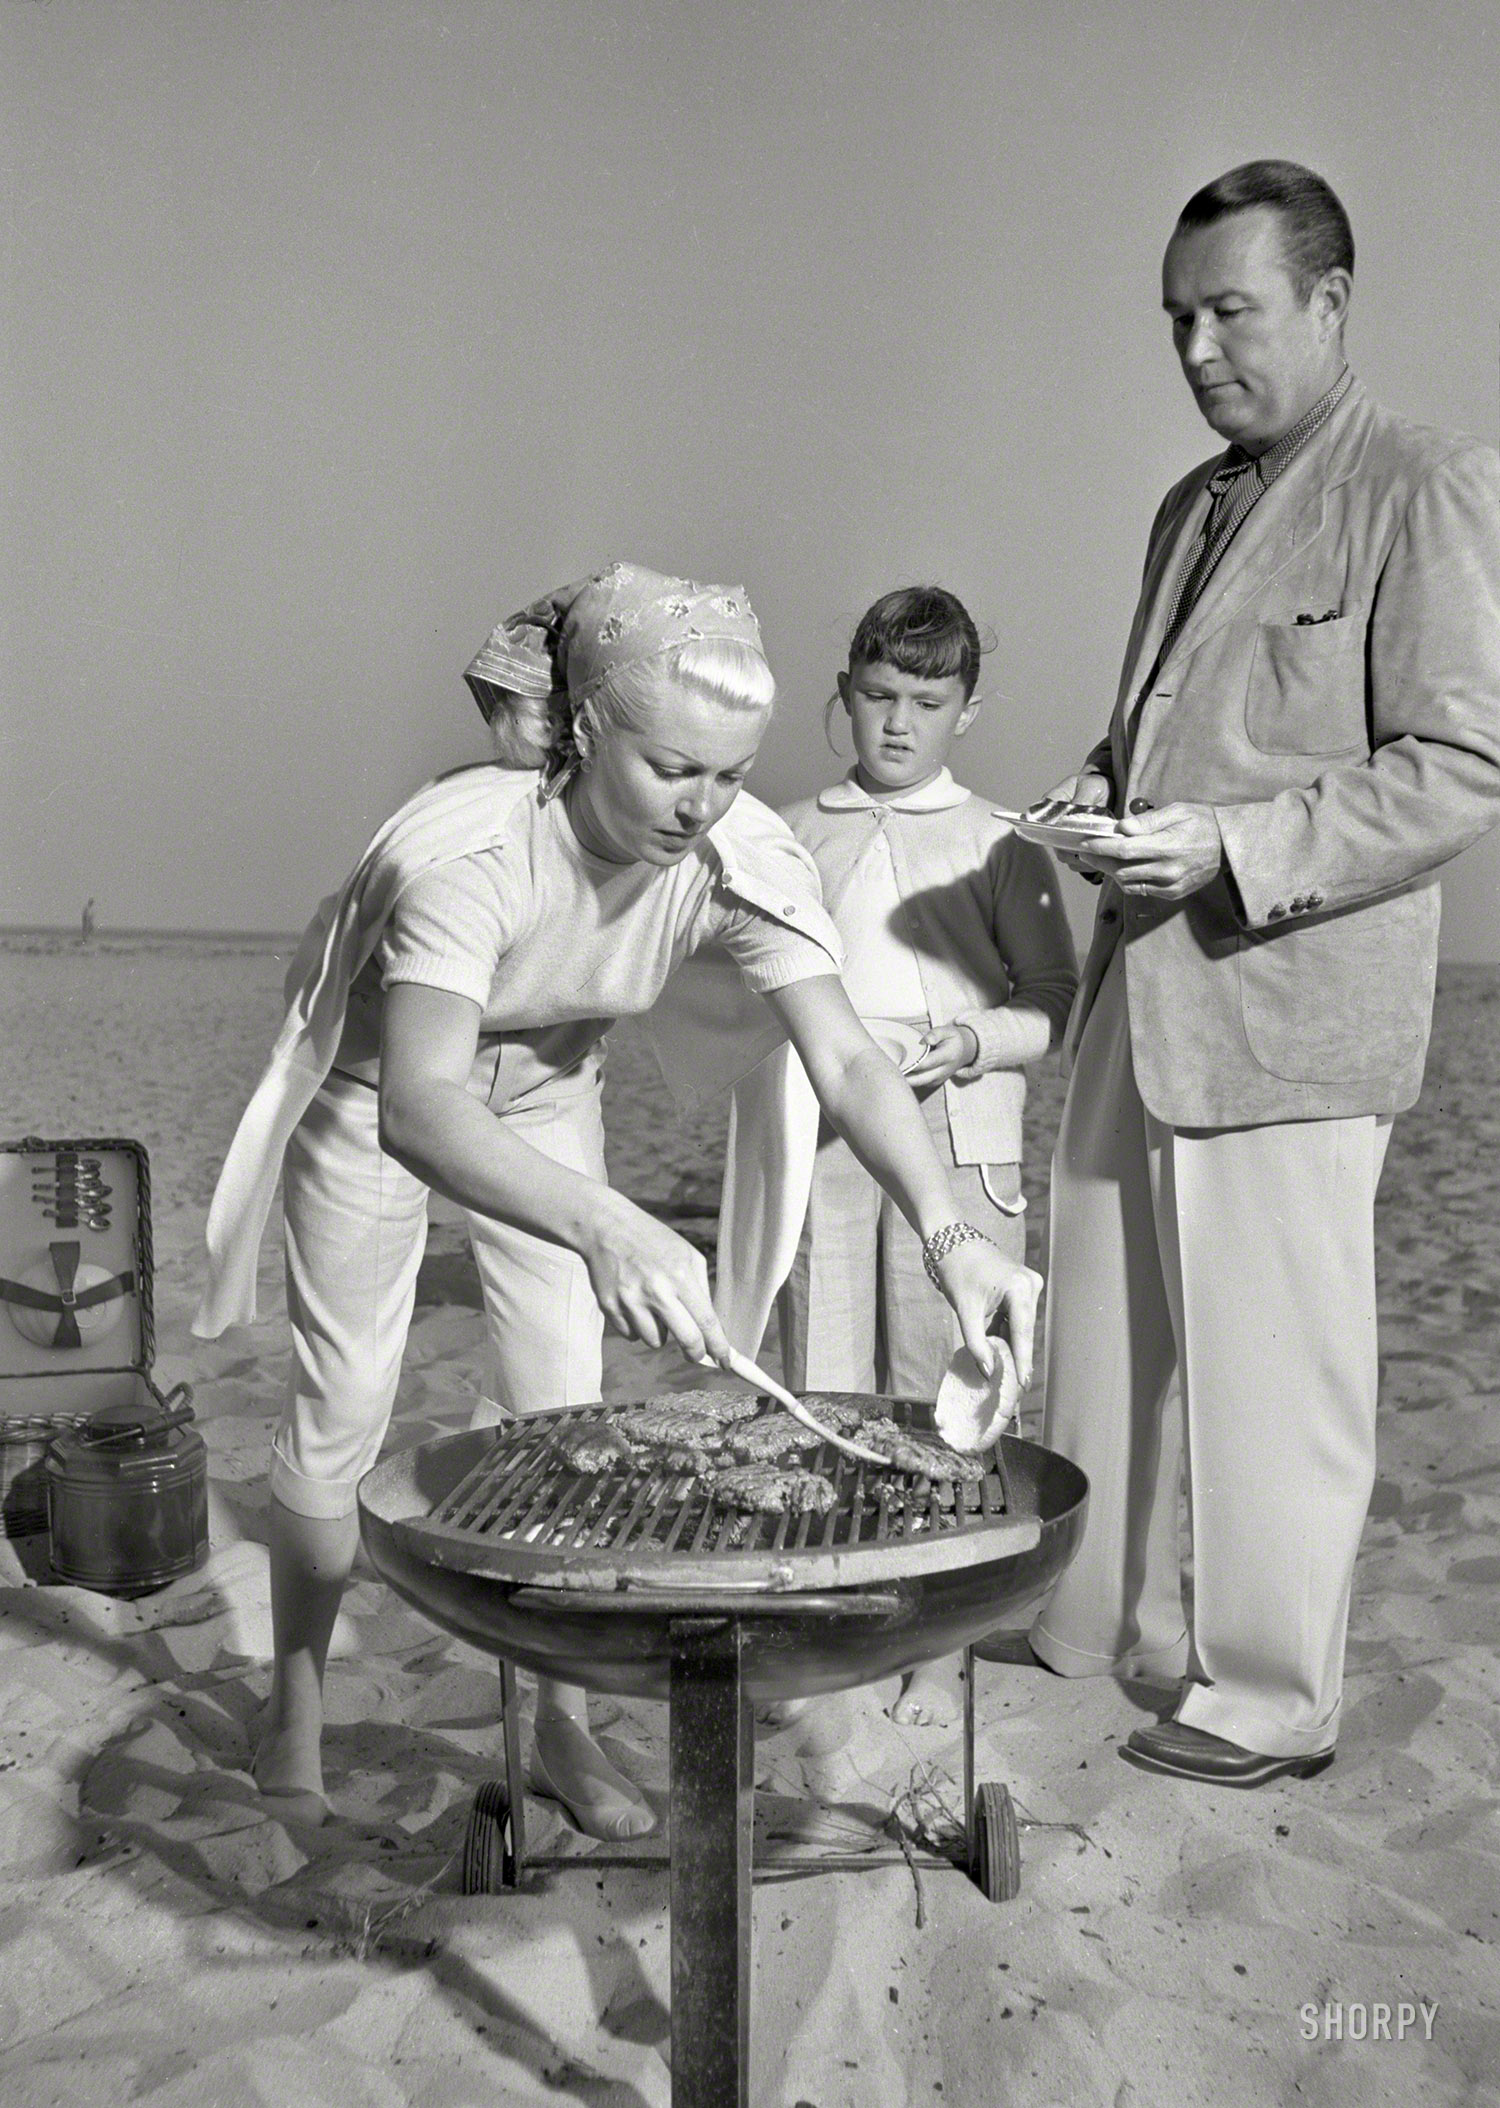 1951. Santa Barbara, Calif. "Actress Lana Turner, daughter Cheryl Crane and husband Henry J. 'Bob' Topping grilling hamburgers at beach." Carefree cookouts -- a family ritual! Photo by Earl Theisen for Look magazine. View full size.